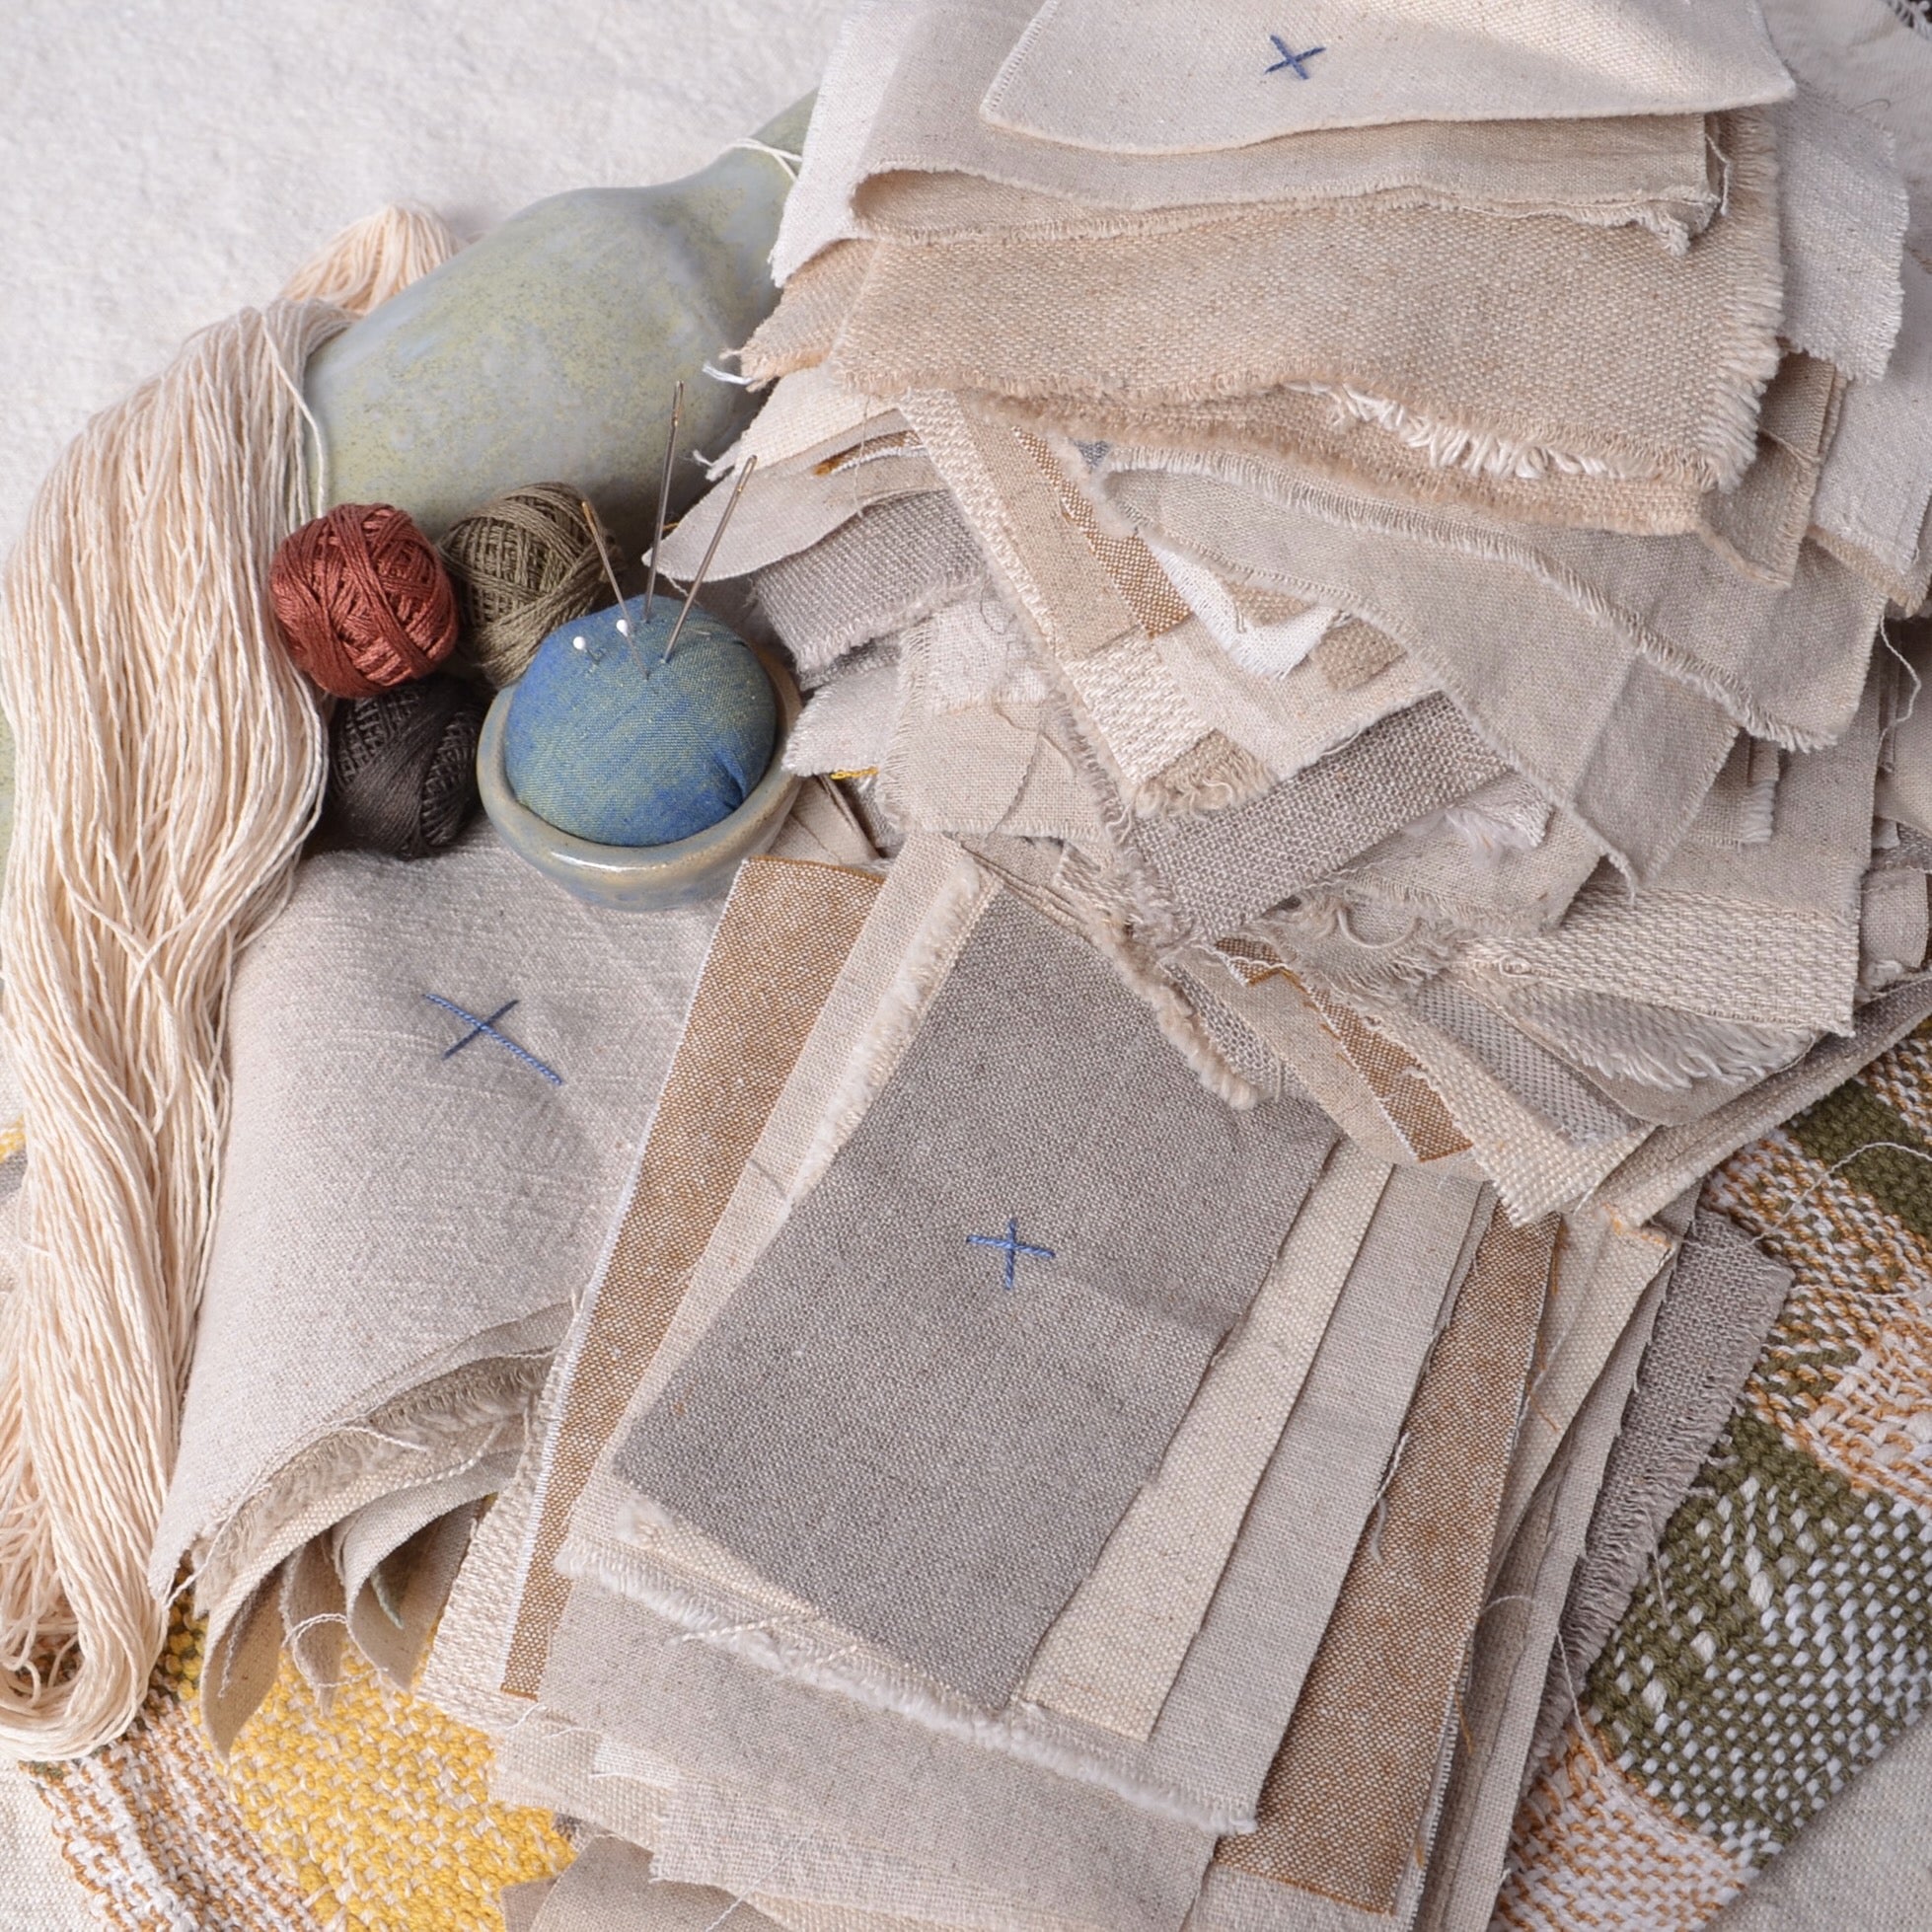 Natural Linen & Cotton Patches for Mending or Stitching